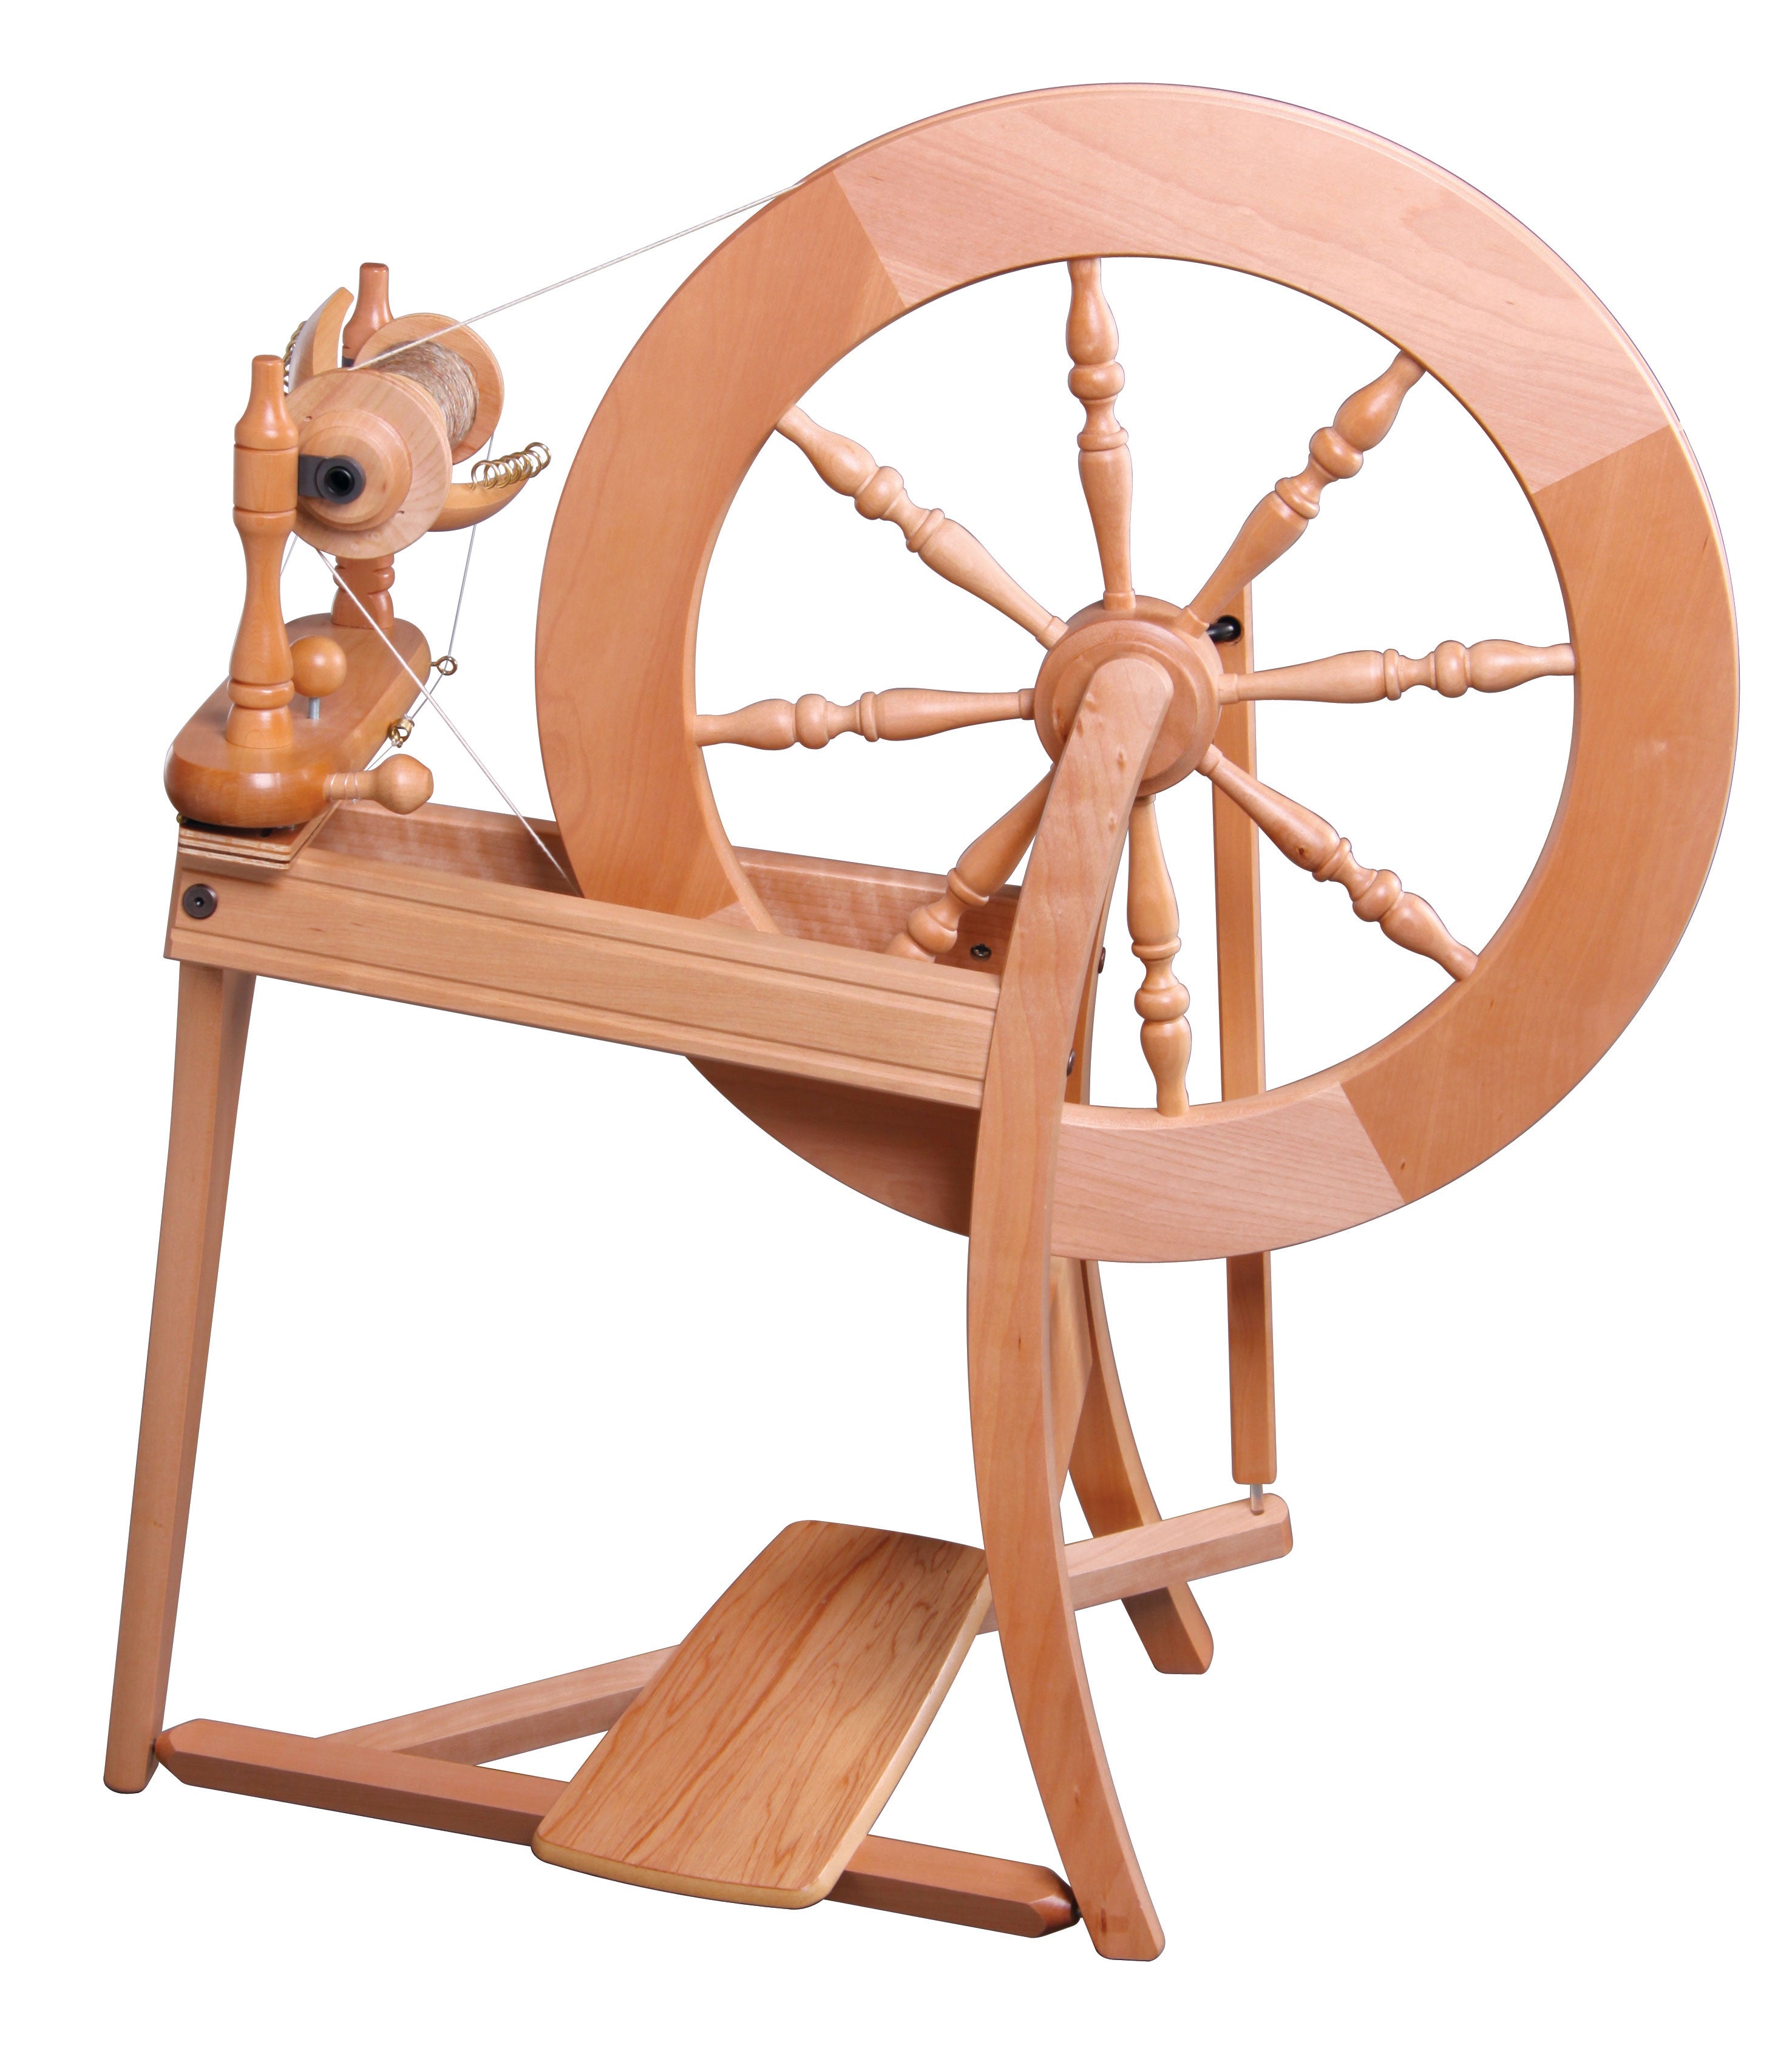 Louet S17 Spinning Wheel – Unraveled